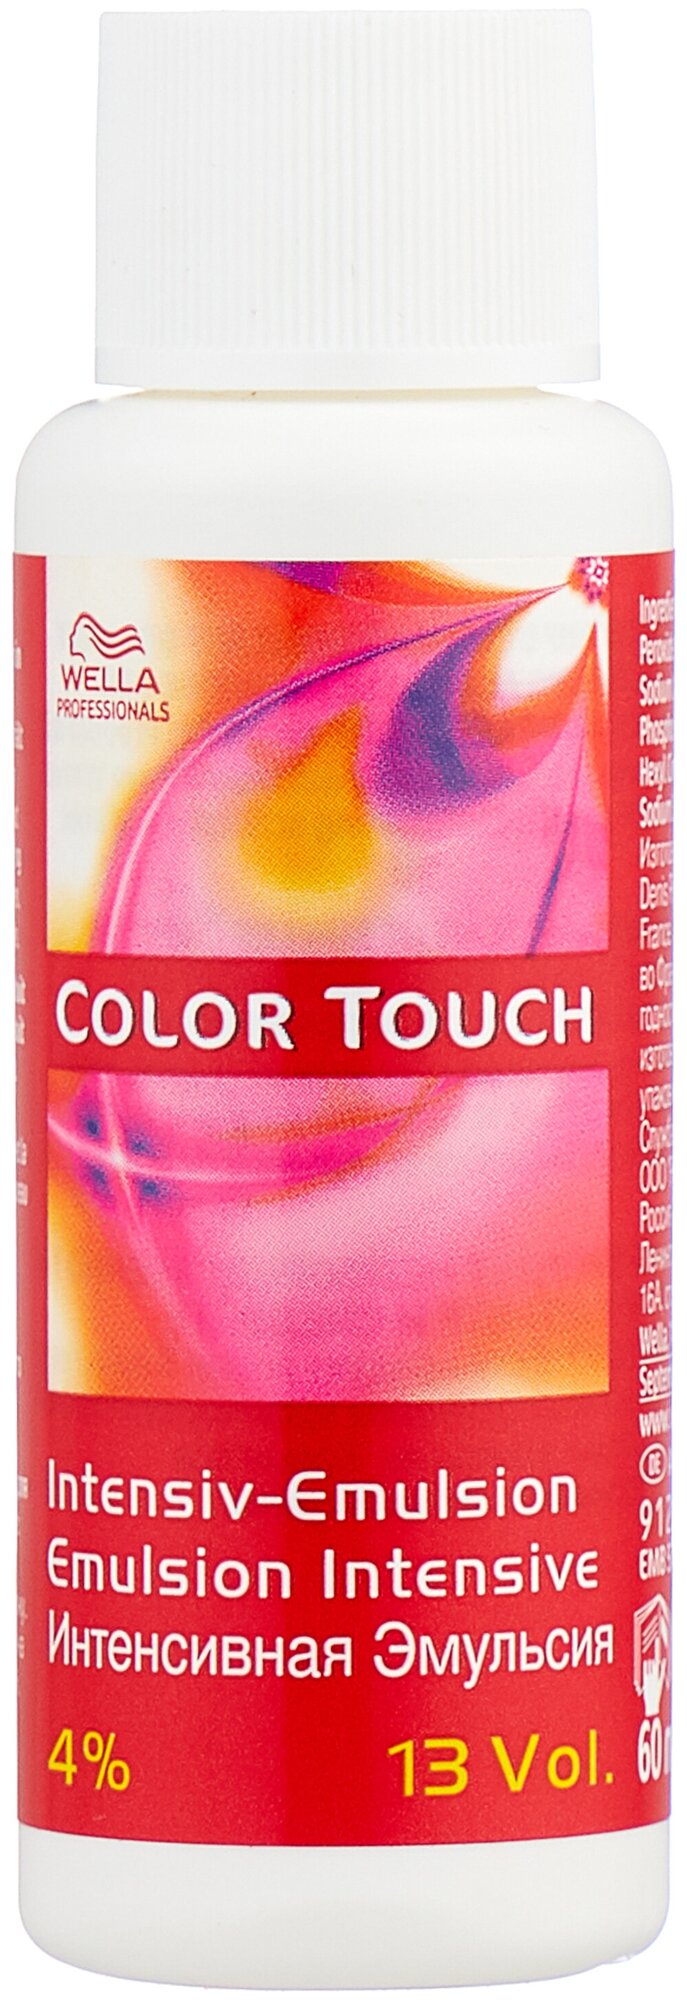 Wella Professionals Эмульсия Color Touch 4 %, 60 мл, 60 г